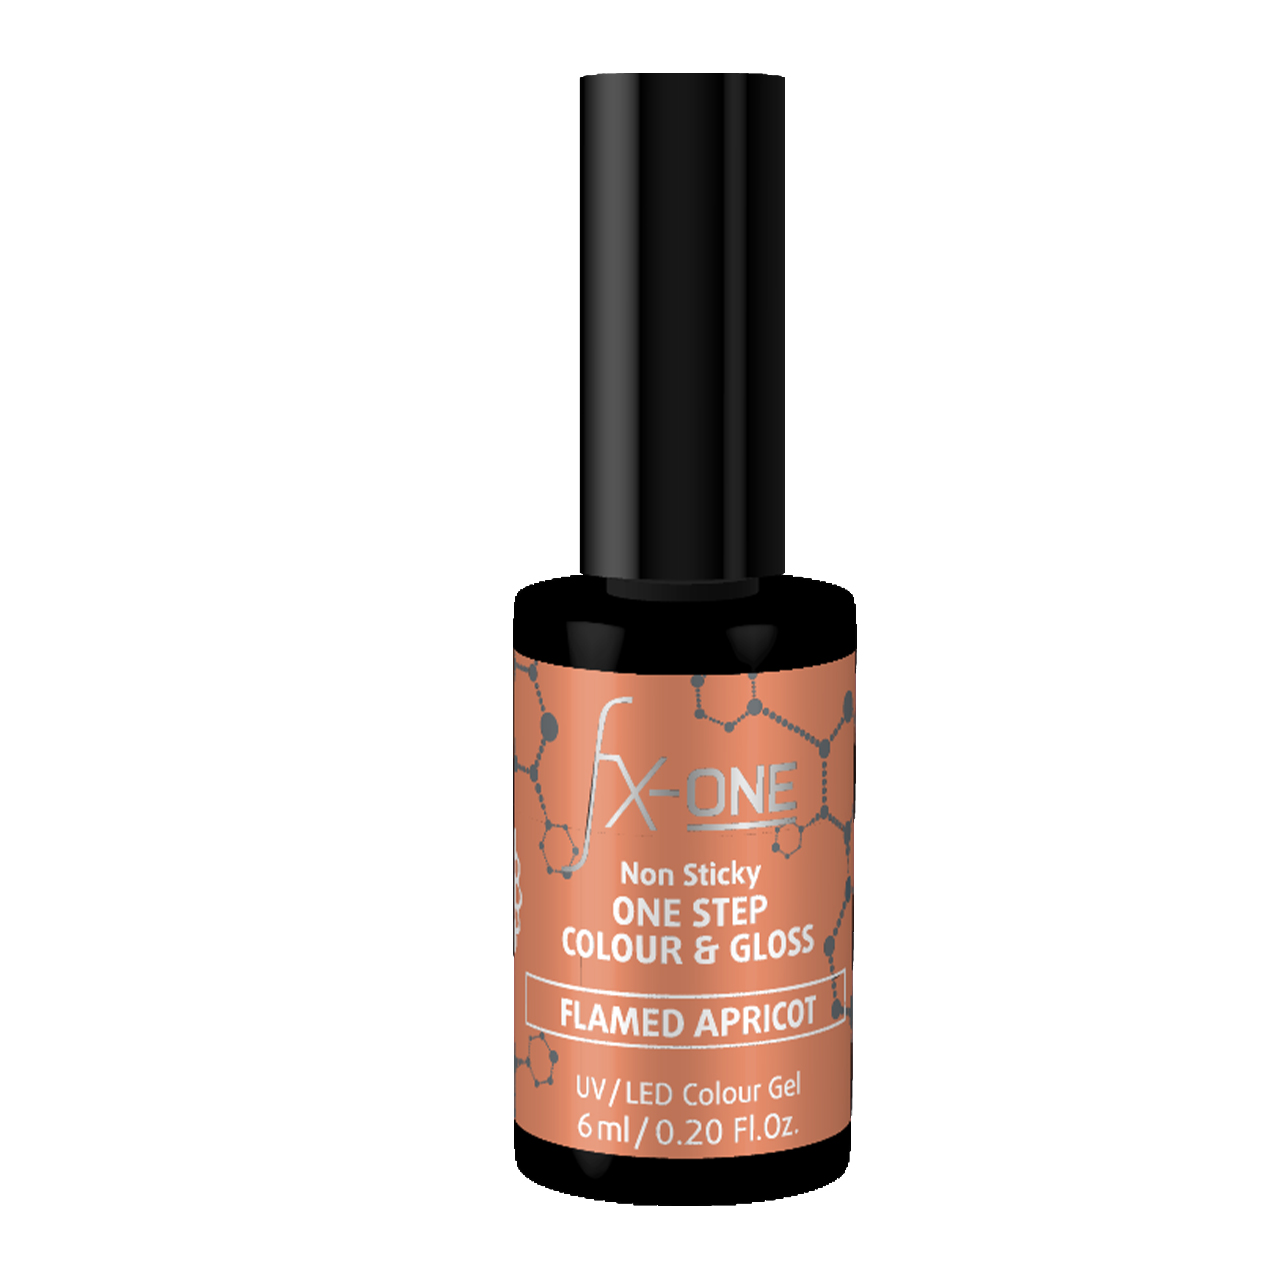 FX-ONE Colour & Gloss Flamed Apricot 6ml